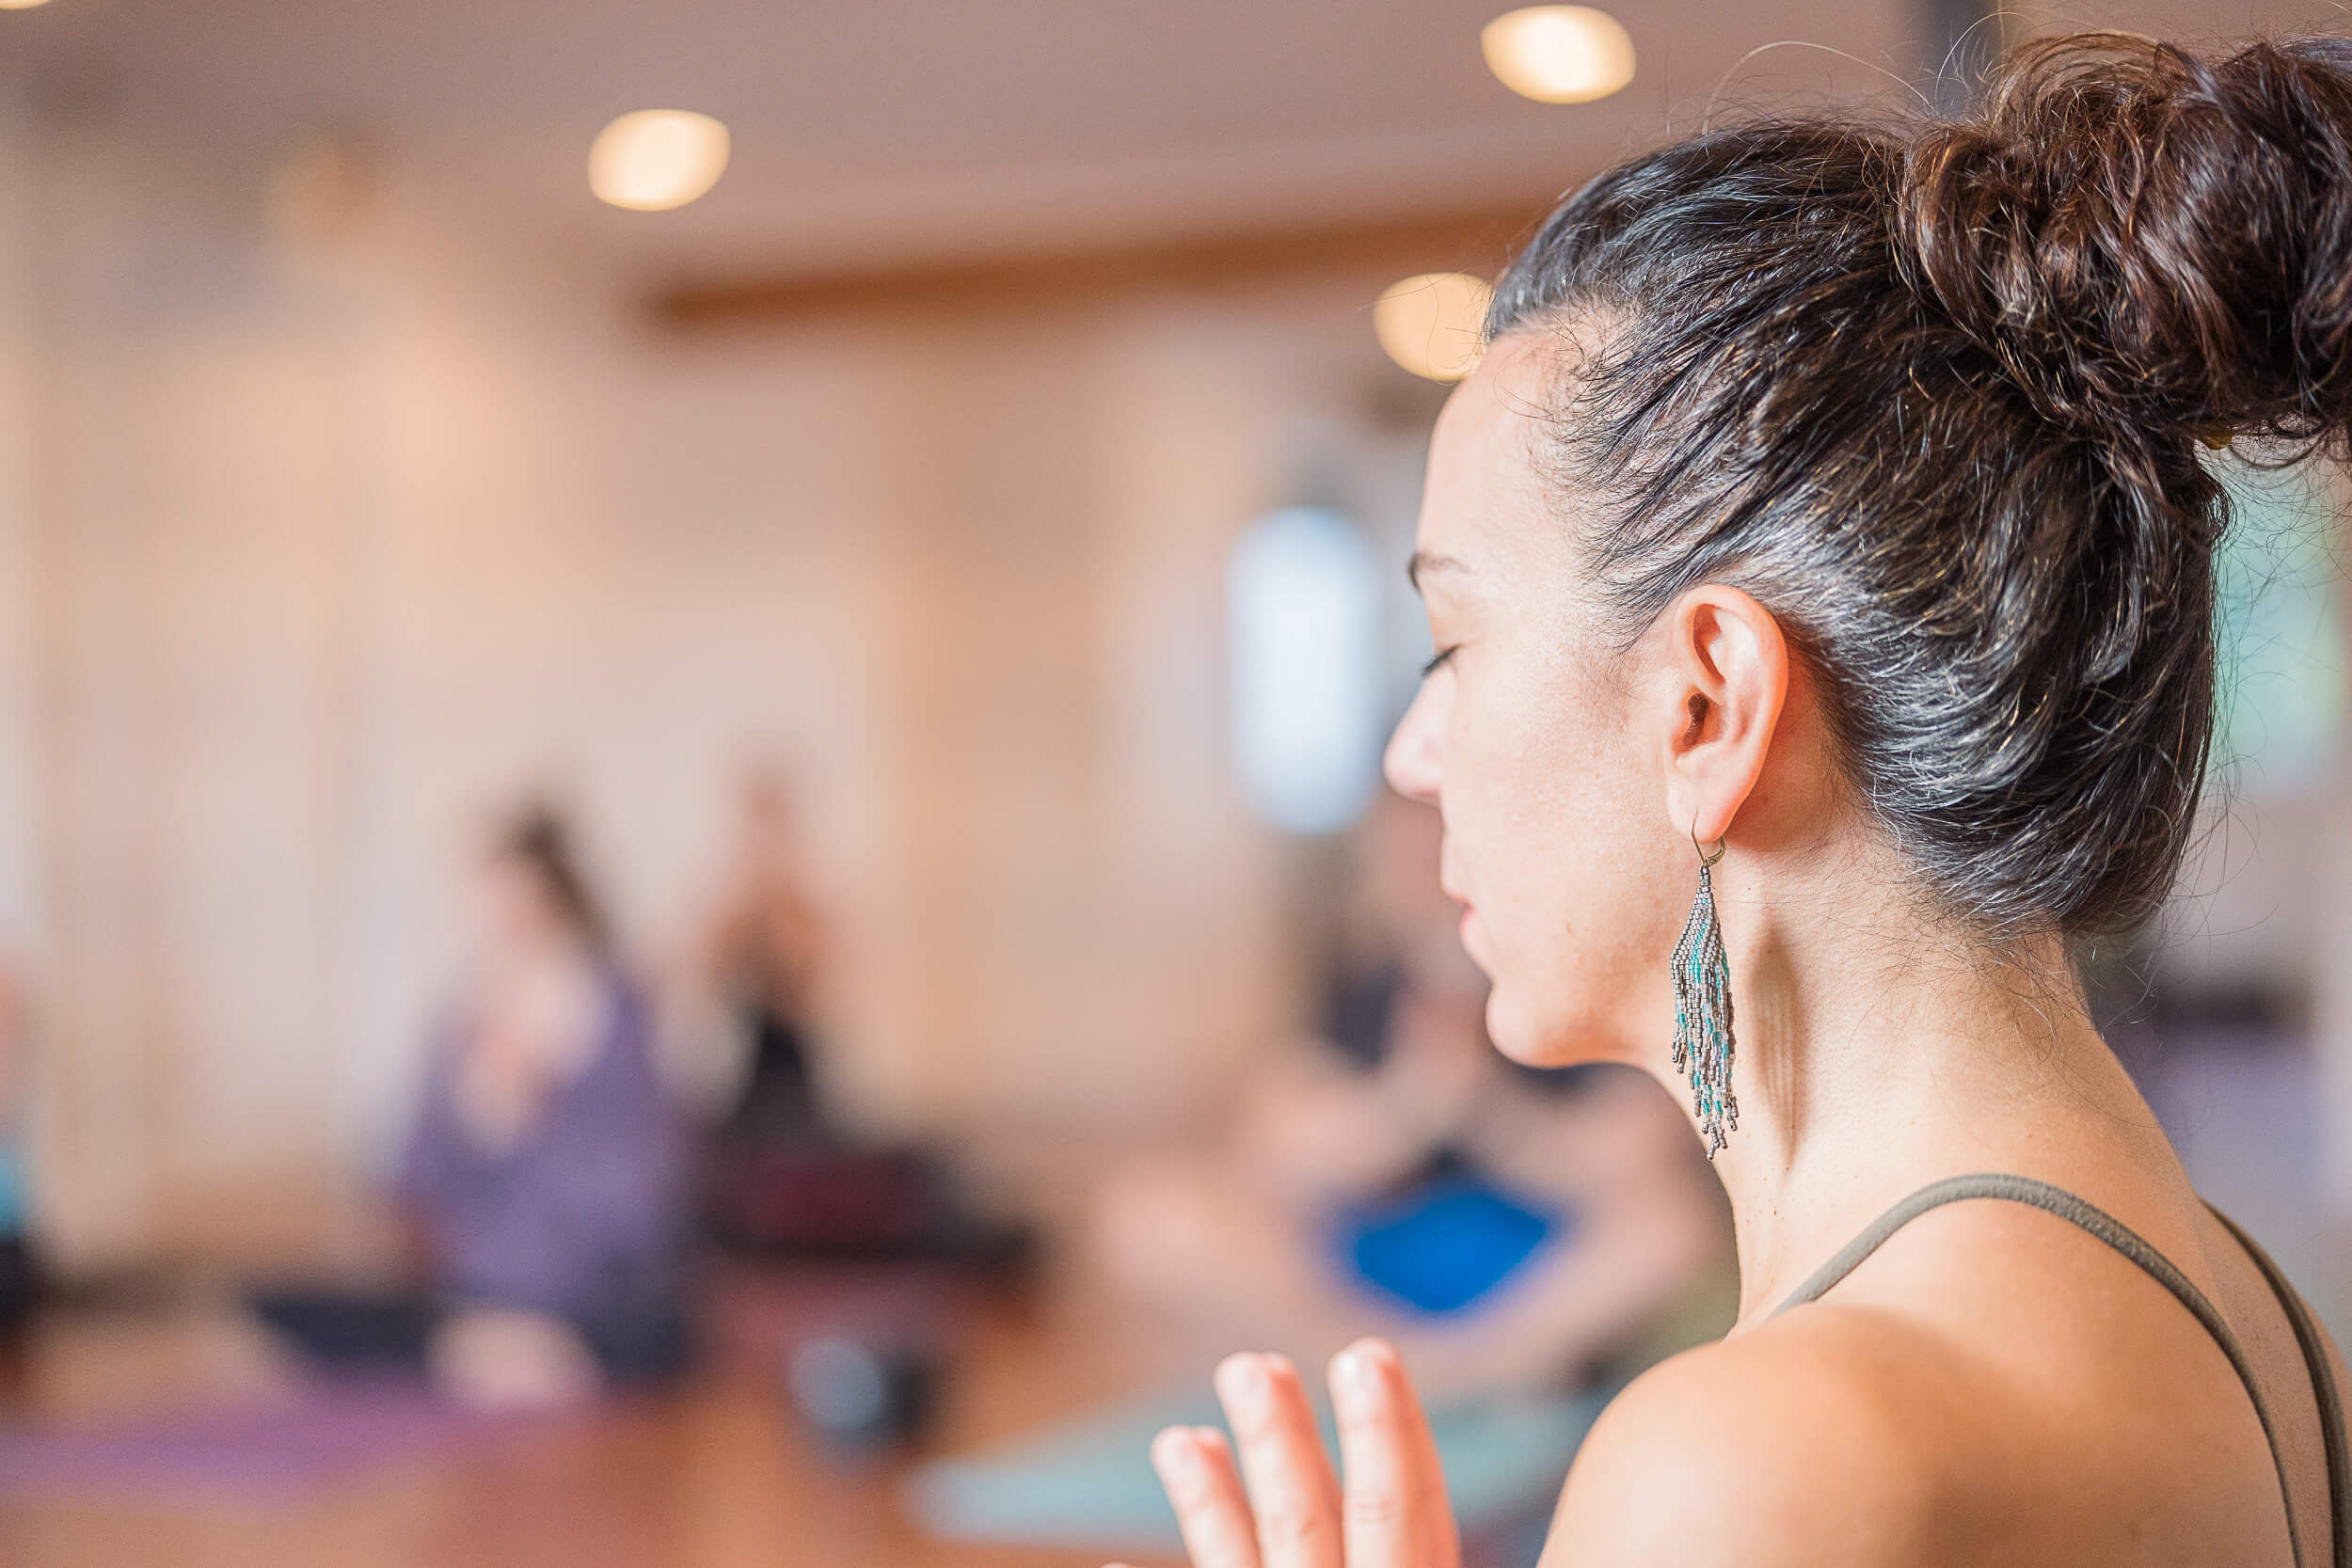 Close-up of a yoga instructor's profile with her hand in Anjali Mudra, eyes closed in concentration, as other participants practice in the softly-focused background at Shala Yoga studio in Squamish.